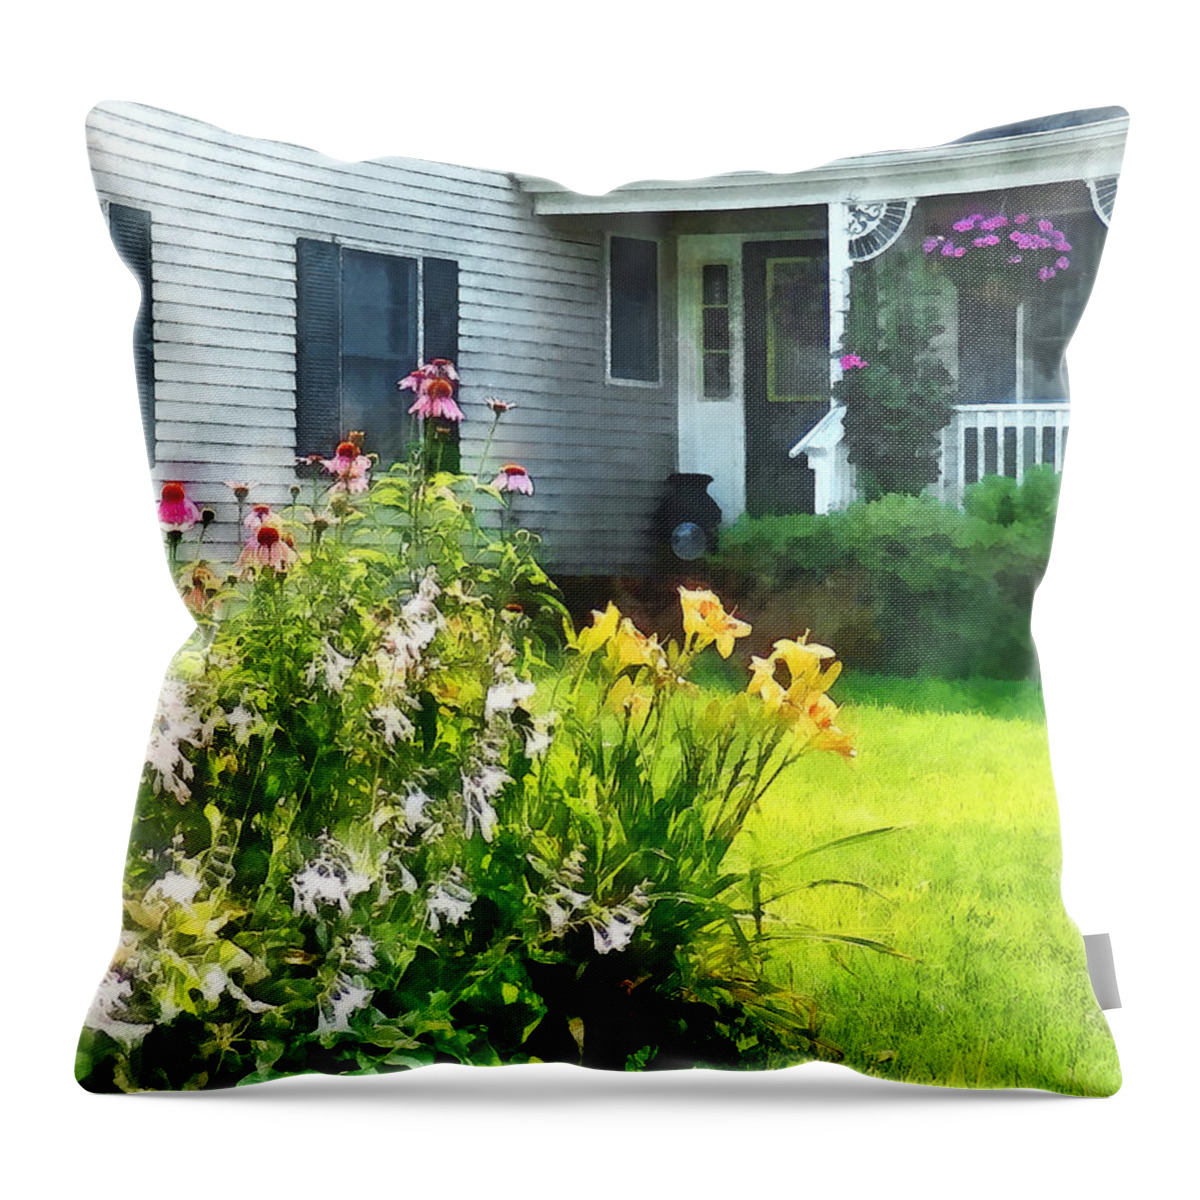 Cone Flower Throw Pillow featuring the photograph Garden with Coneflowers and Lilies by Susan Savad